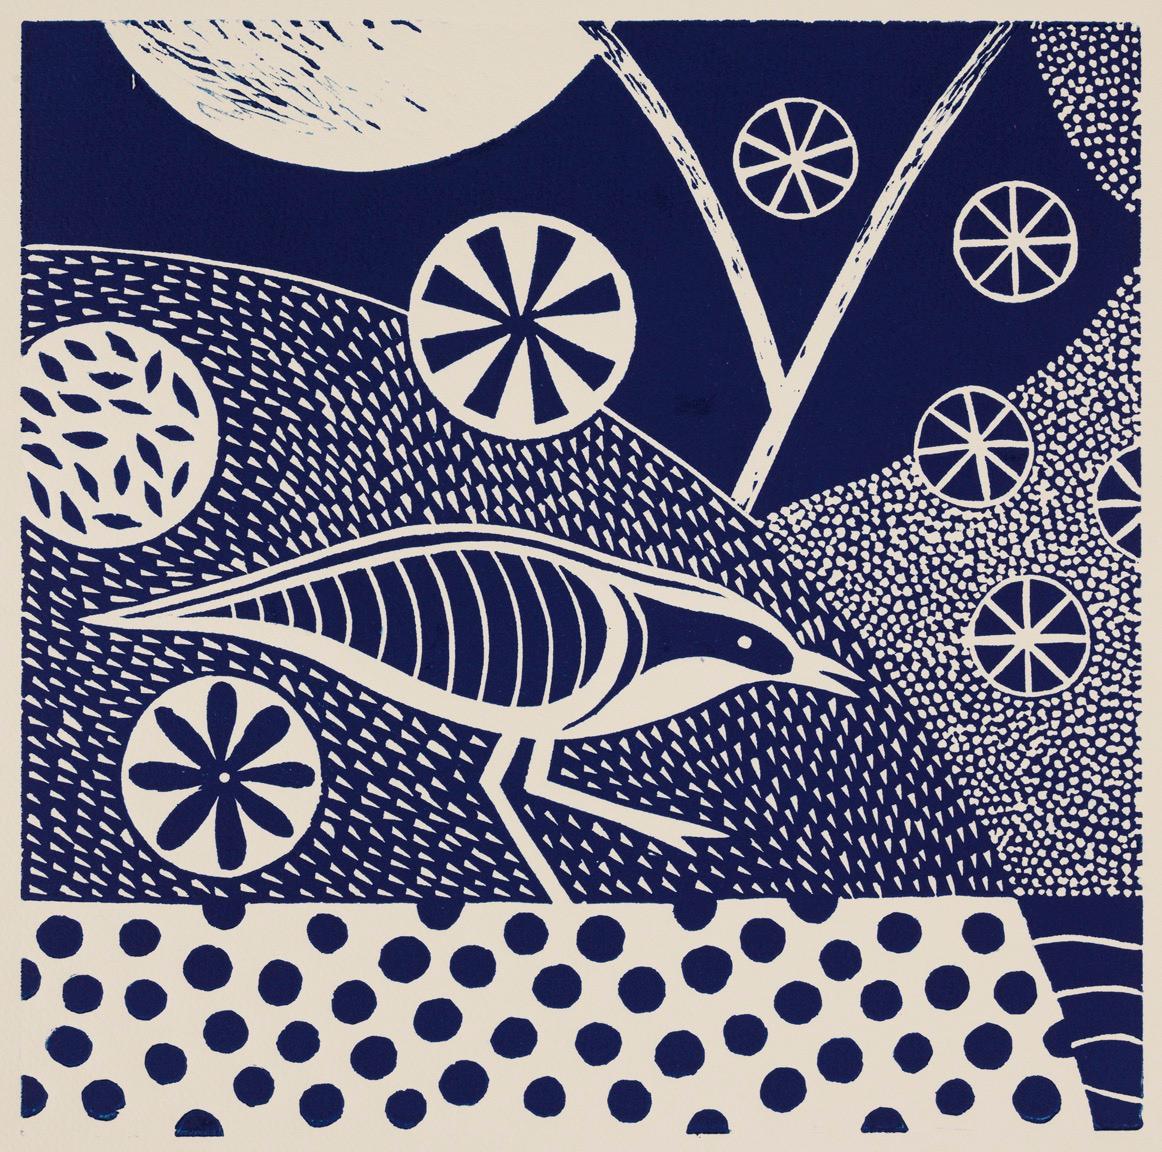 'Chittering and Chattering III'  Linoleum Block Print,  Edition 10,  11 5/8 x 11 5/8 Inches, is one of a series of 6 related prints in this size in varying shades of blue.   Sold individually or as sets of 2, 3, 4, 5 or 6.

There is also a series of